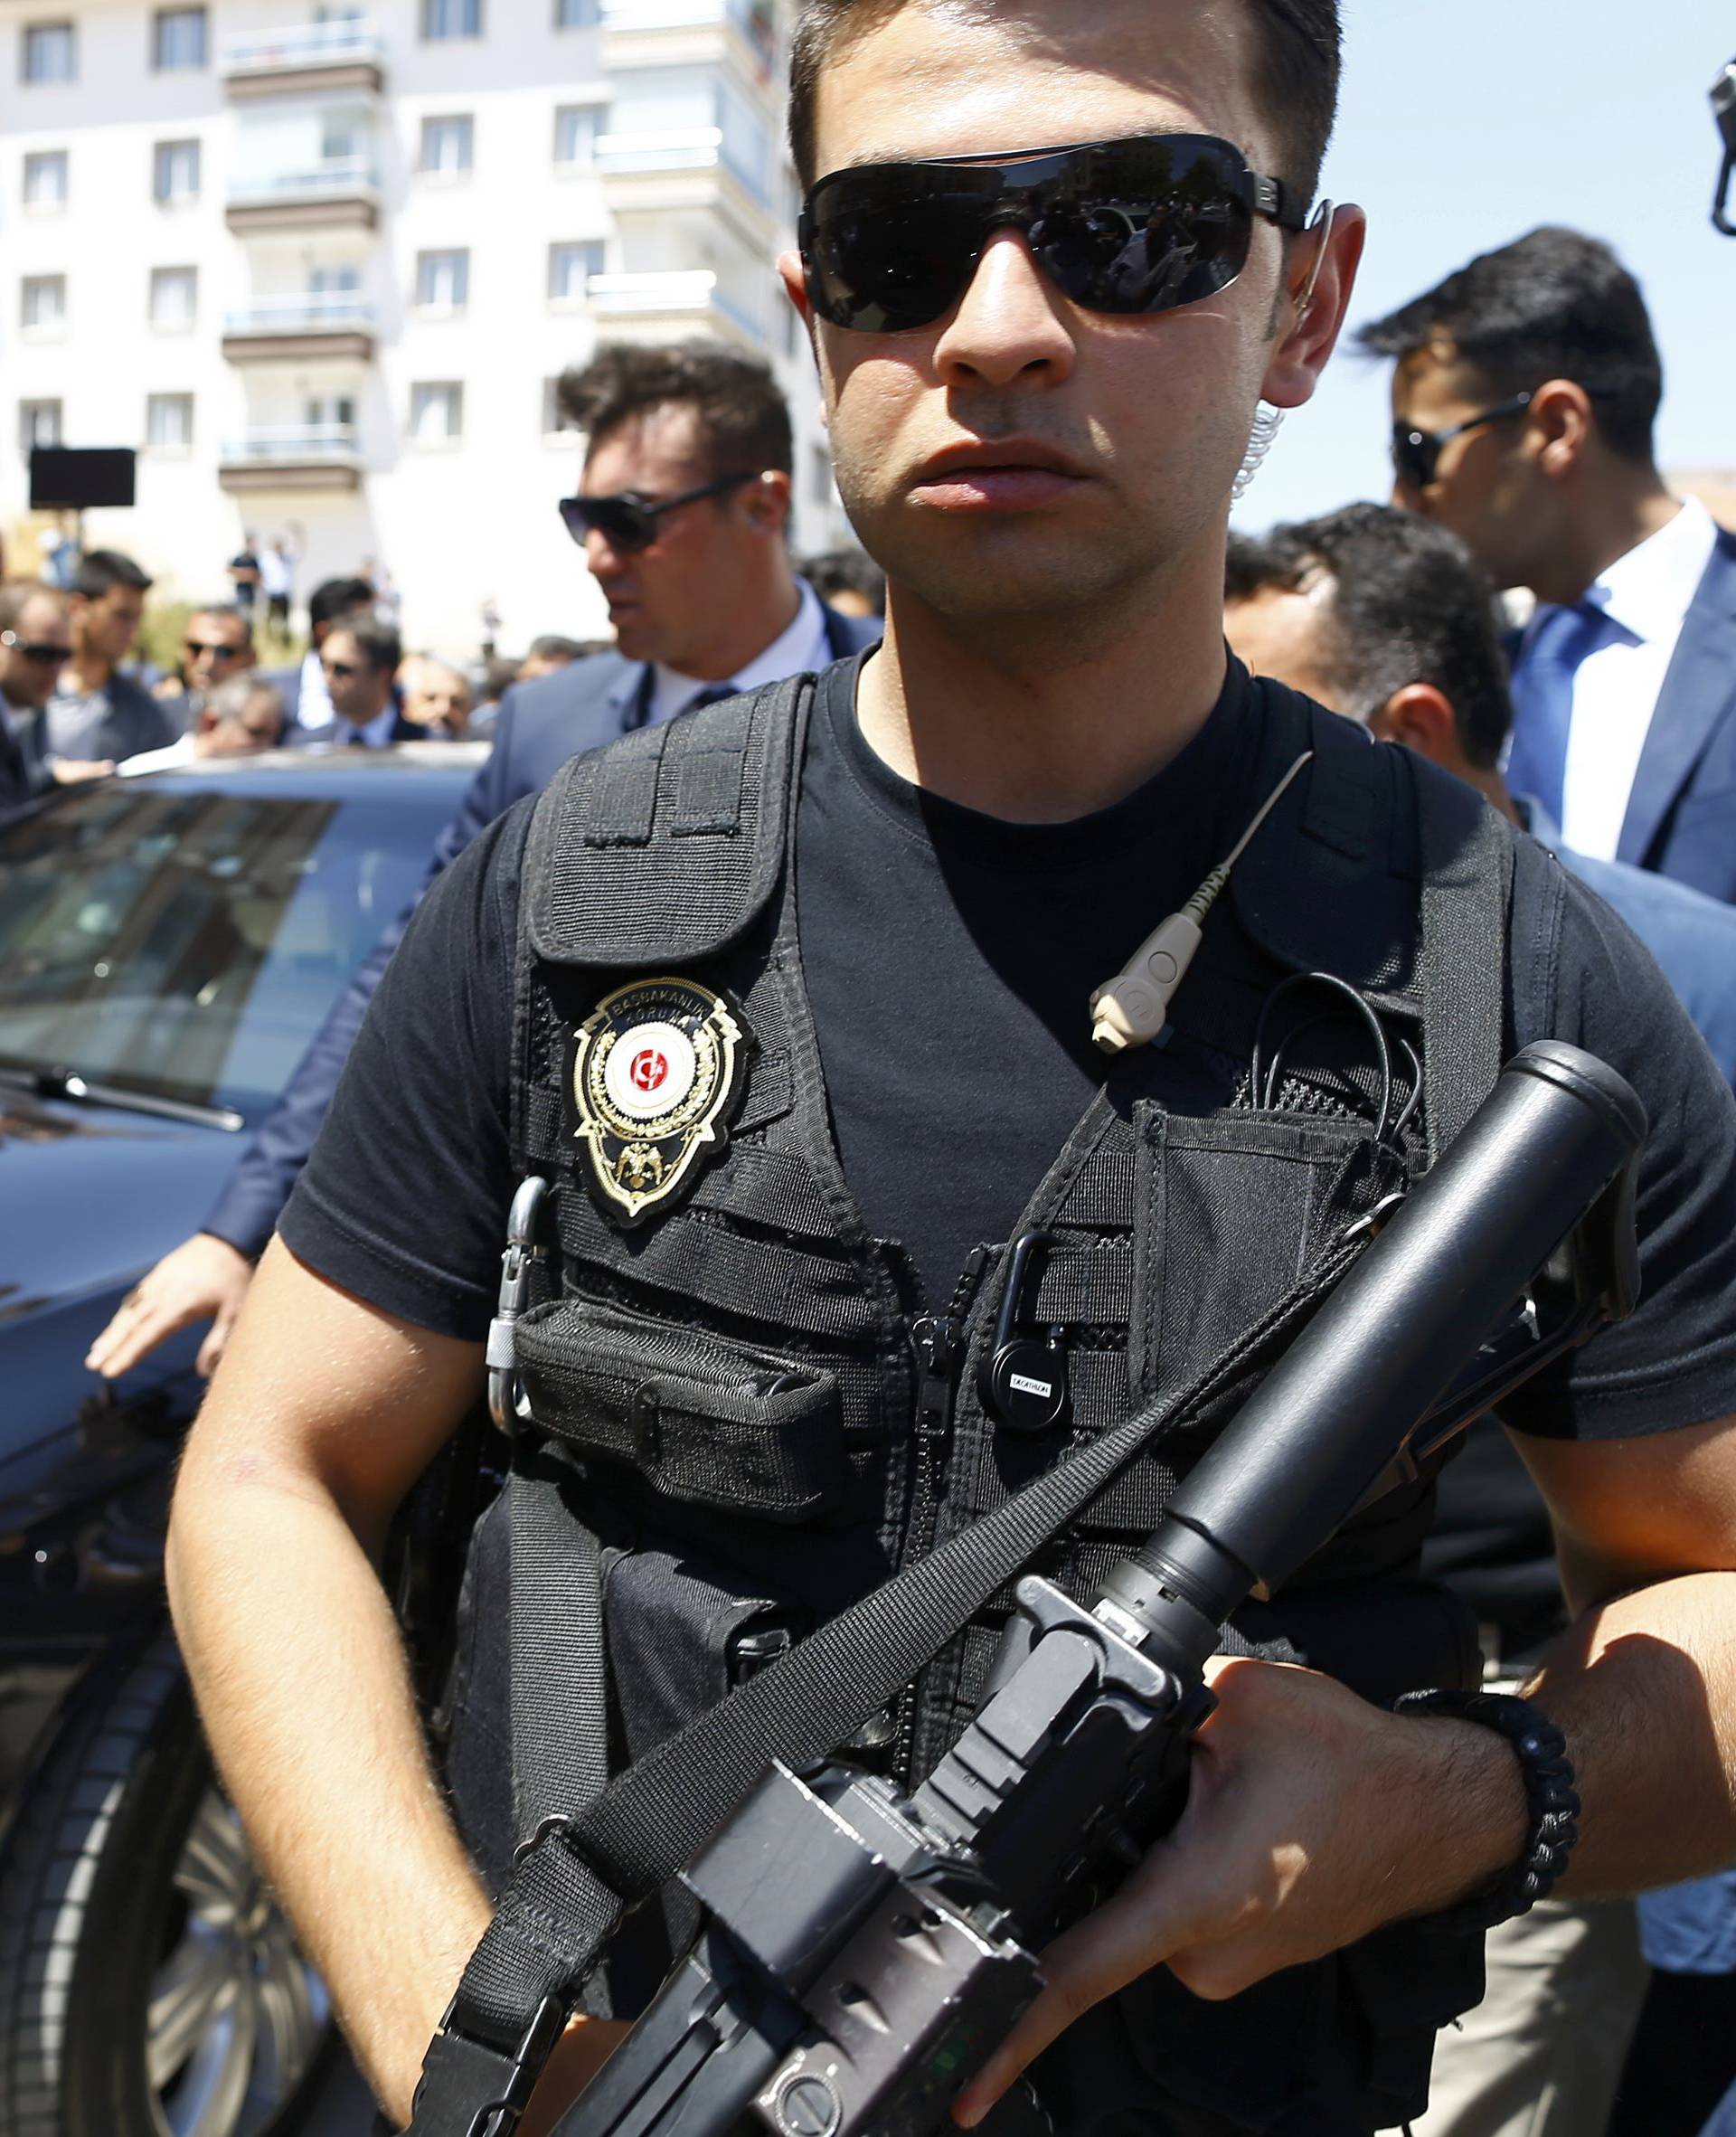 Security guard the car of Turkish PM Yildirim before a funeral service for a victim of the thwarted coup in Ankara